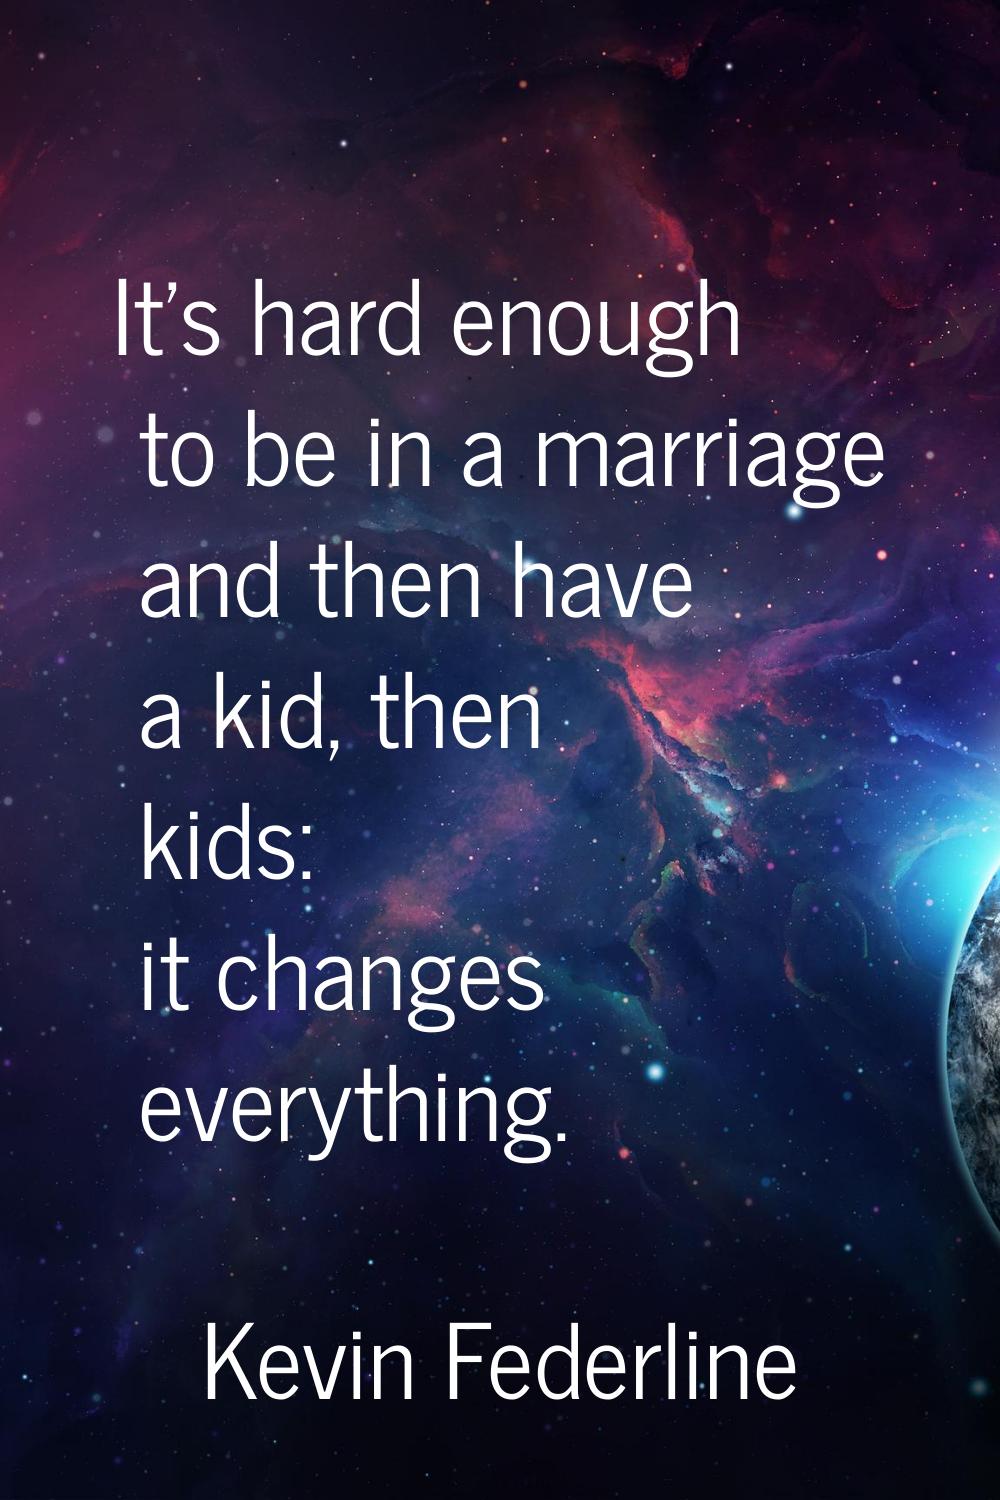 It's hard enough to be in a marriage and then have a kid, then kids: it changes everything.